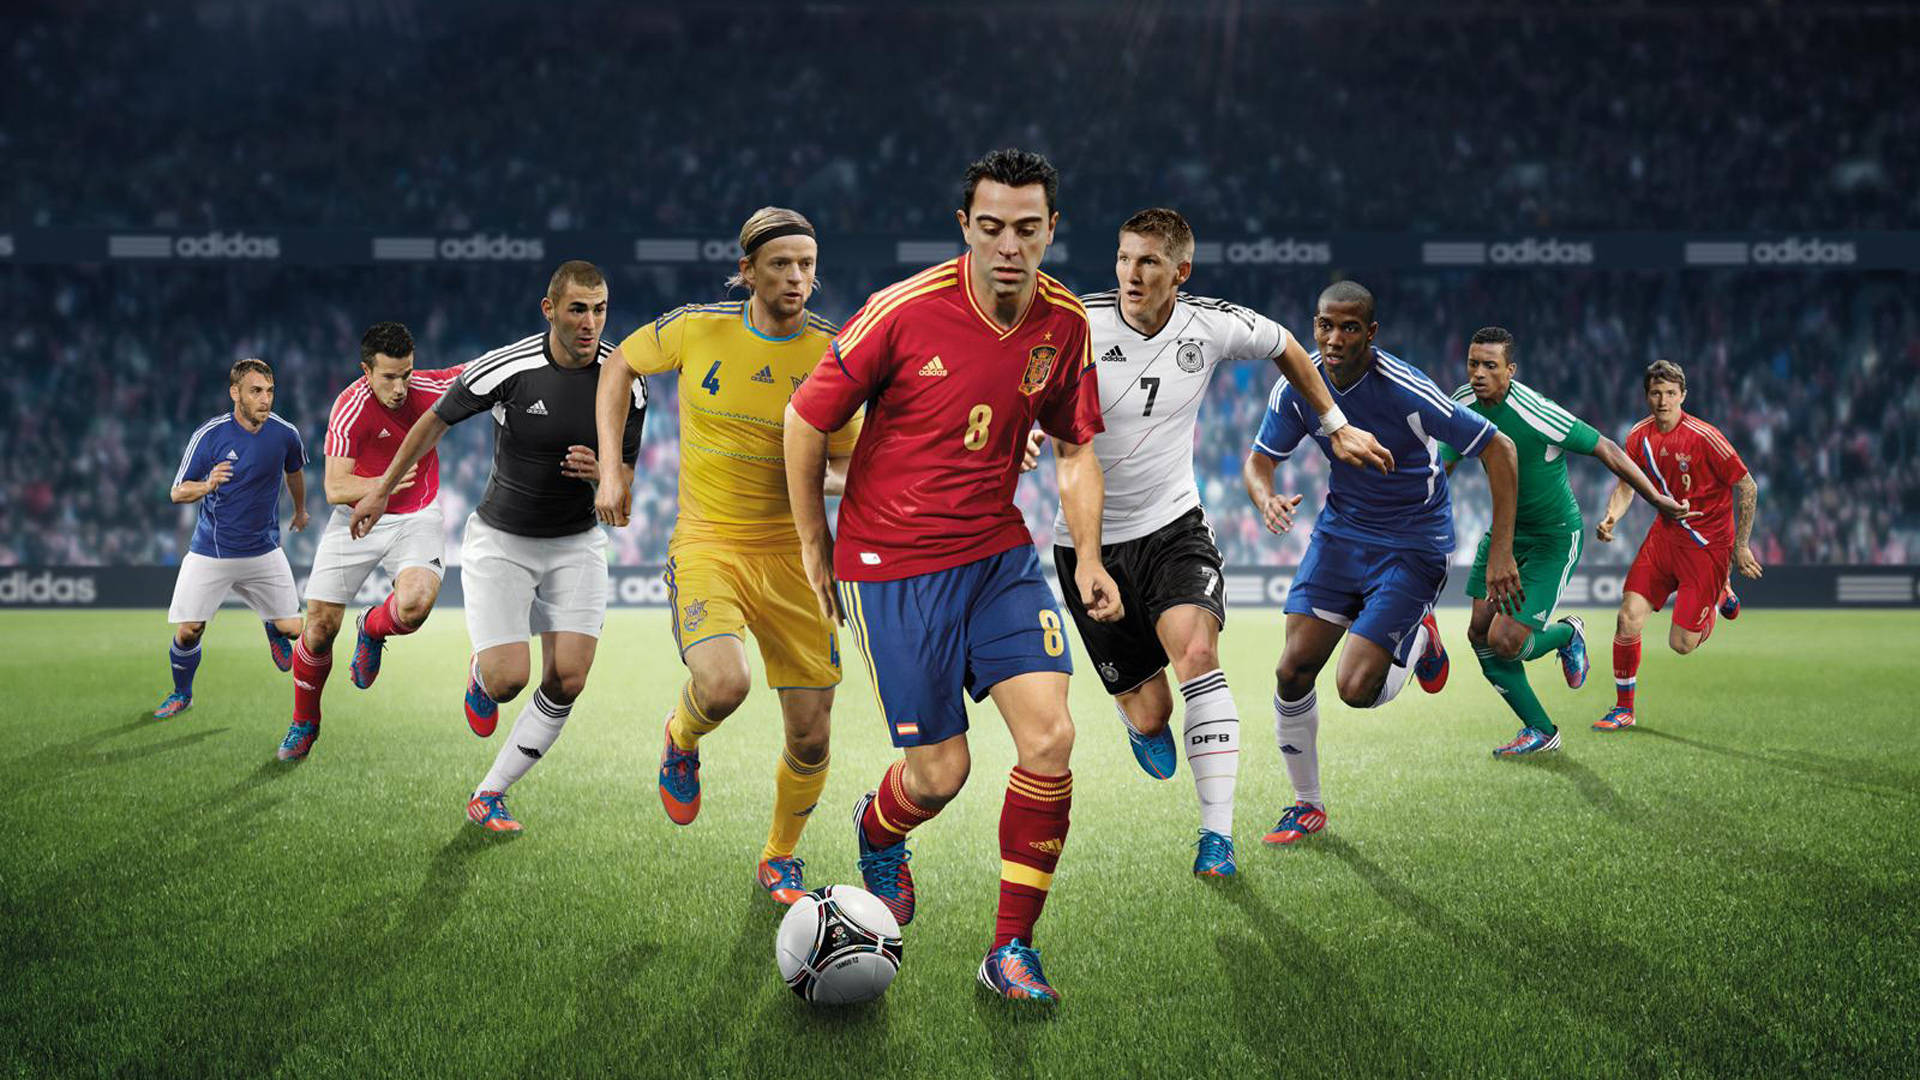 Football Hd Players In A Match Background